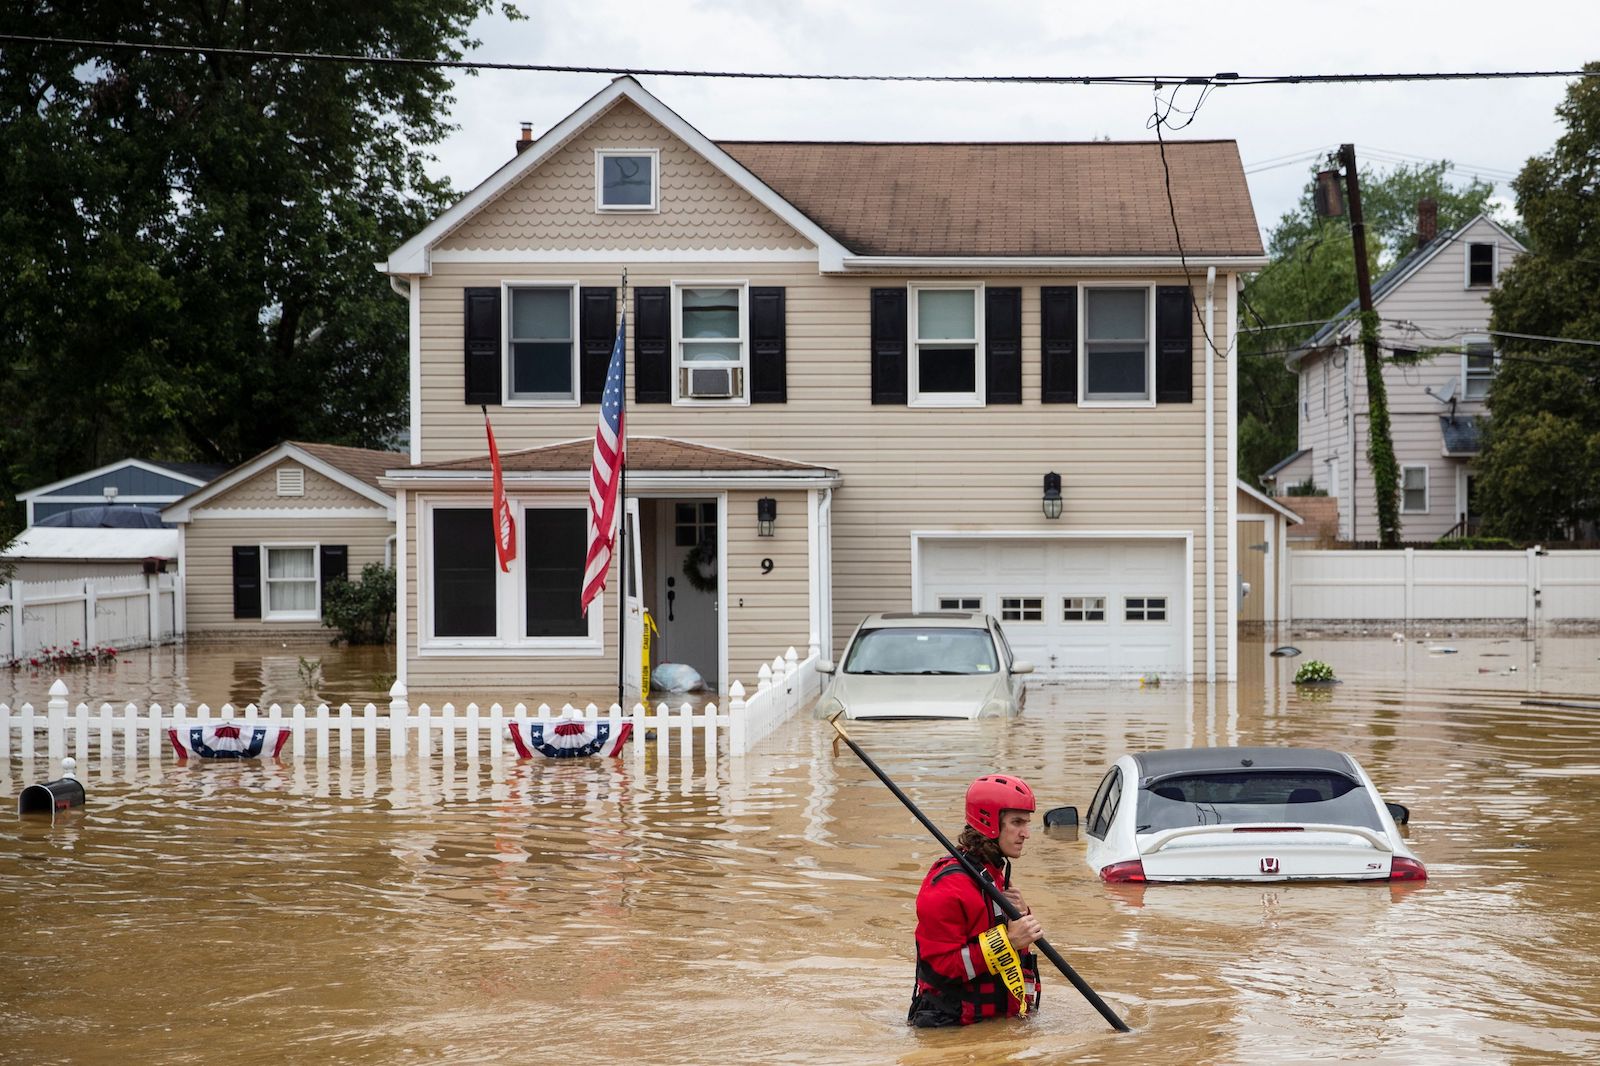 A New Market Volunteer Fire Company rescue crew member wades through high waters following a flash flood, as Tropical Storm Henri makes landfall, in Helmetta, New Jersey, on August 22, 2021.